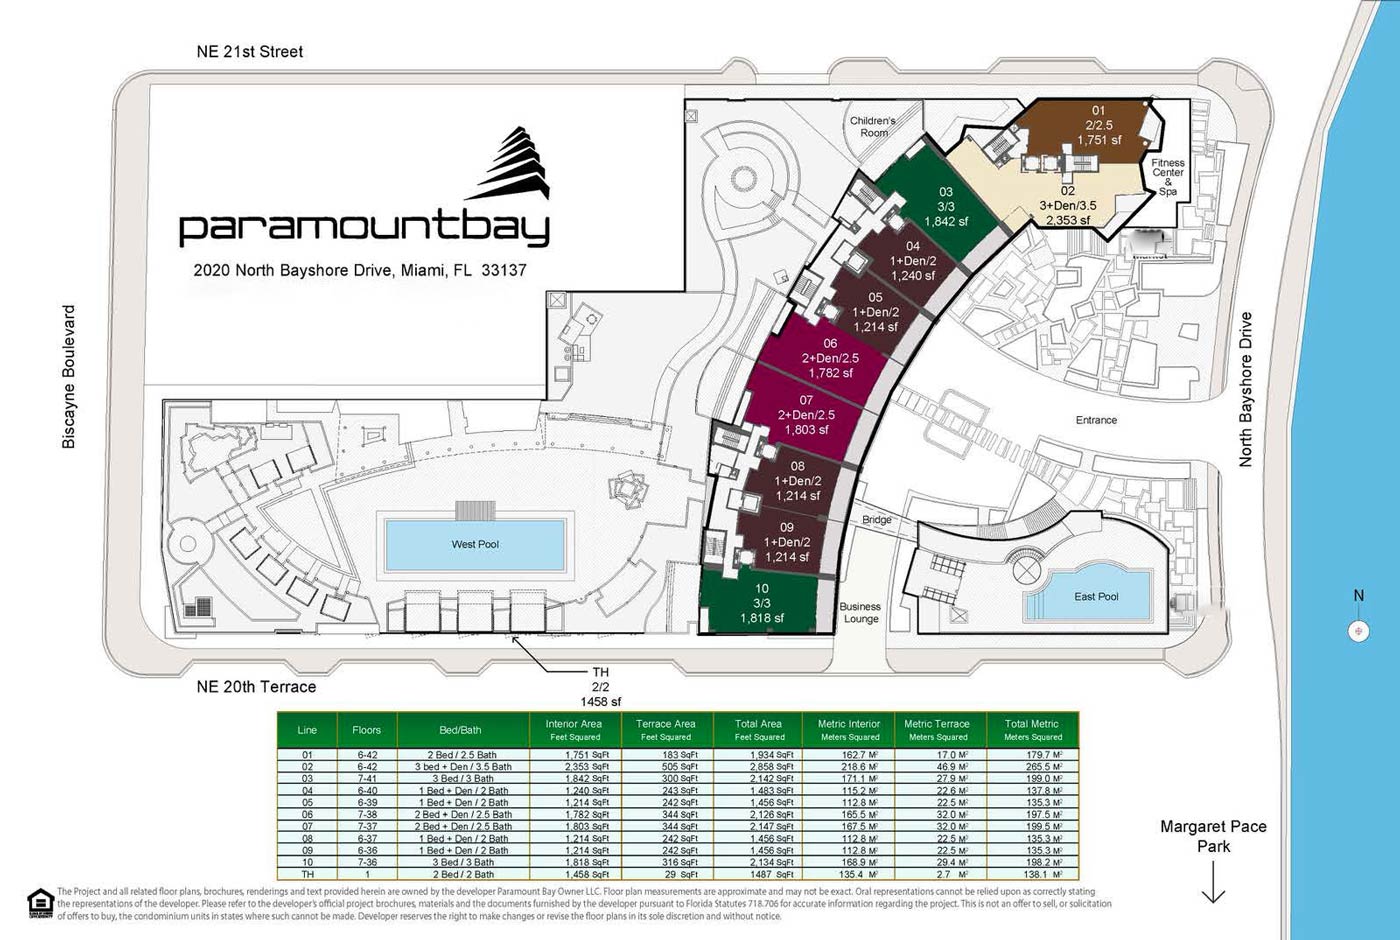 Paramount Bay Miami Unit and Common Area Layout